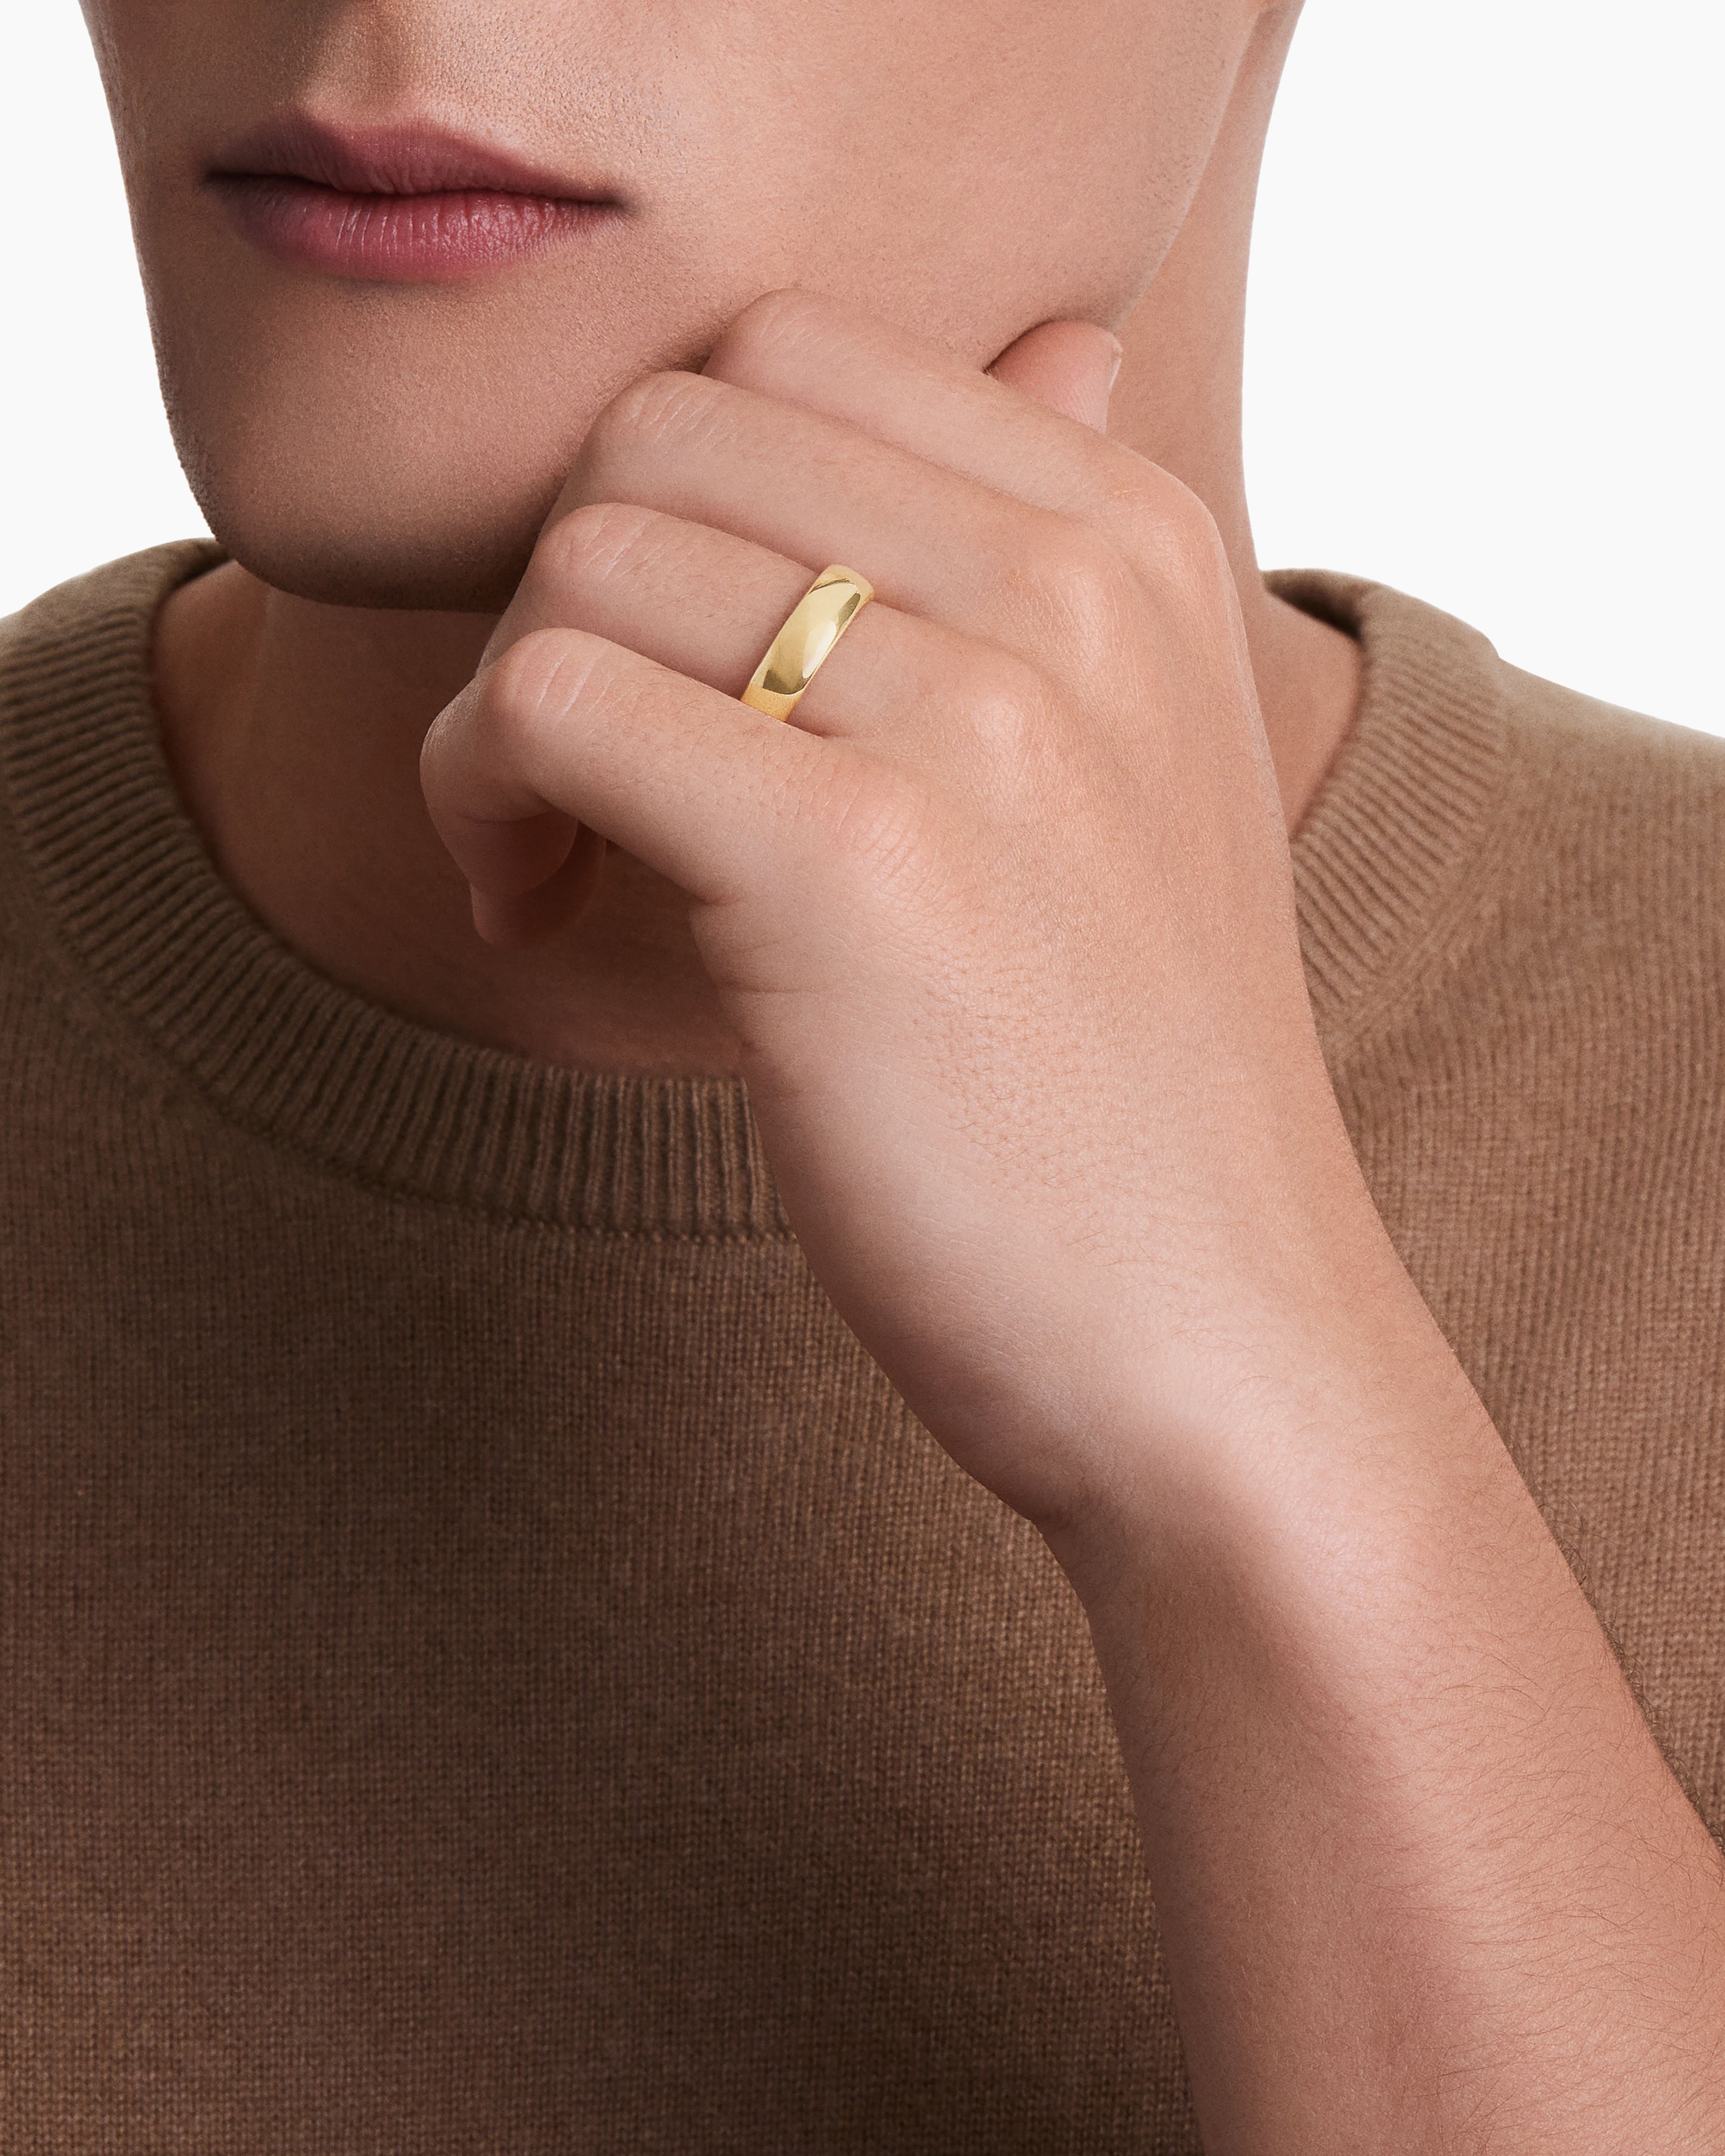 Rings Women, Gold Stackable Rings, Gold Band, Statement Rings, Adjustable  Rings, Gold Rings, Stacking Ring, Gift for Her. - Etsy